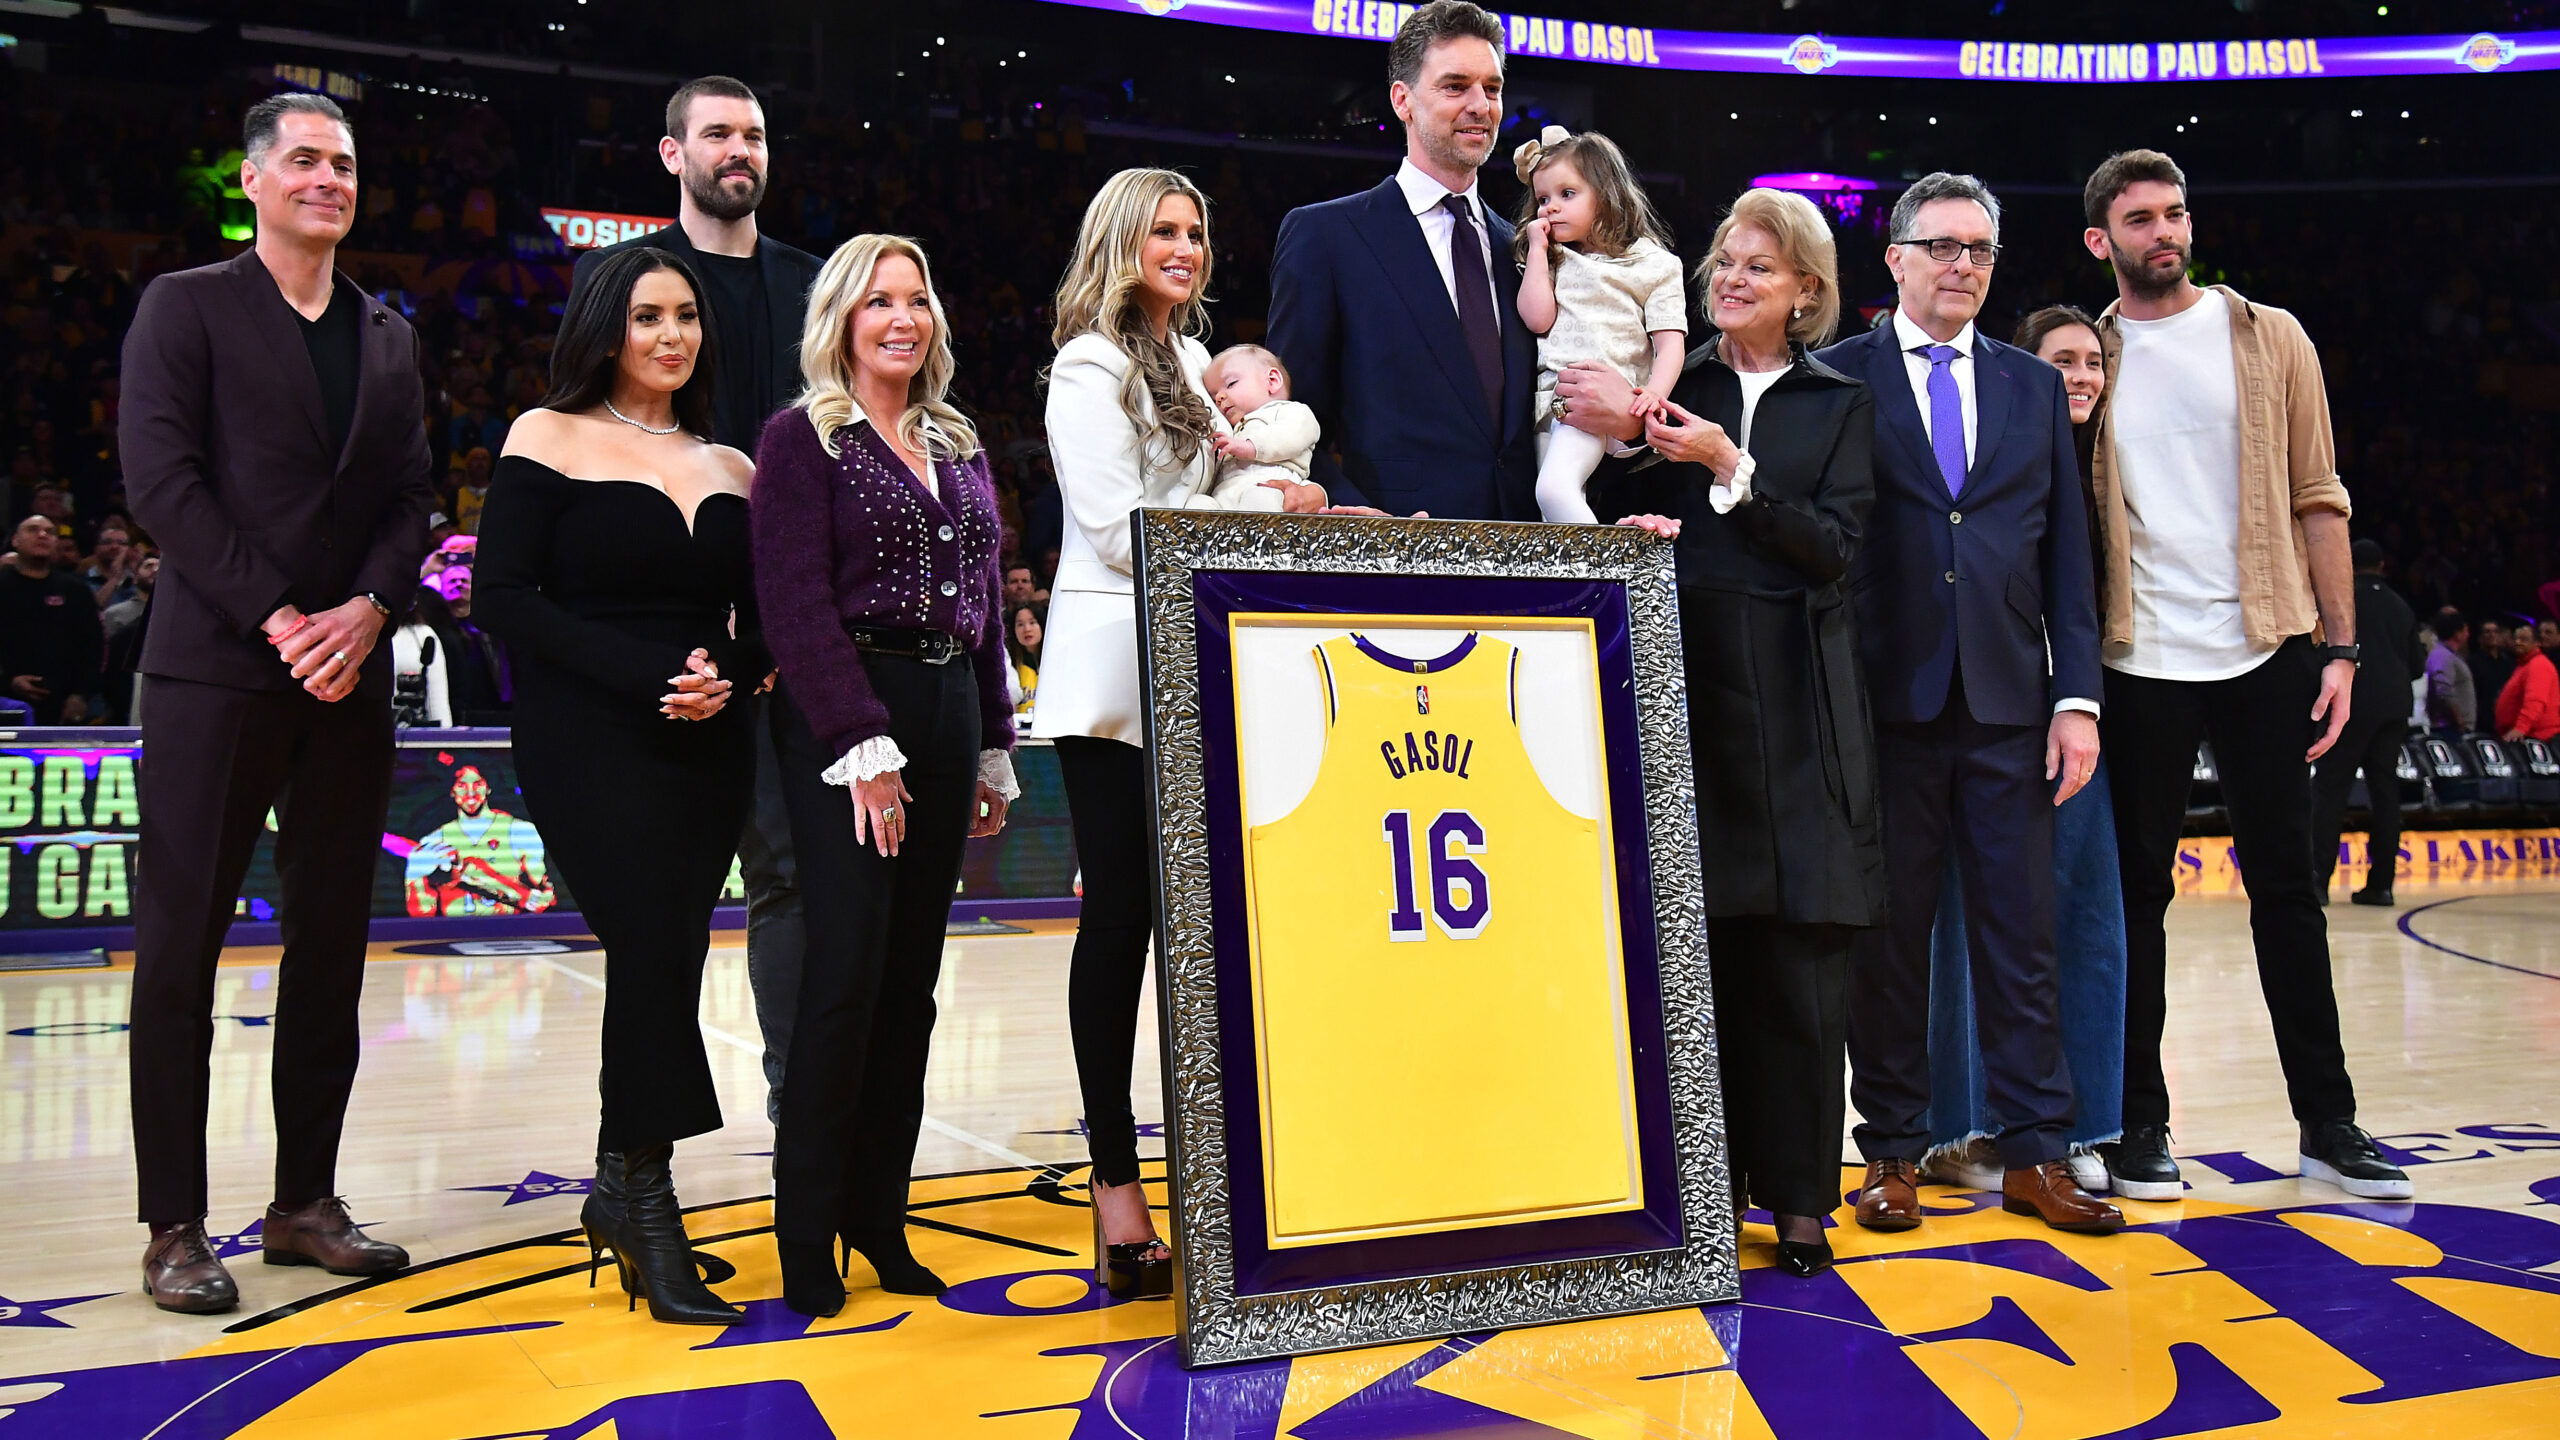 Lakers to retire Pau Gasol's jersey No. 16 in March - Los Angeles